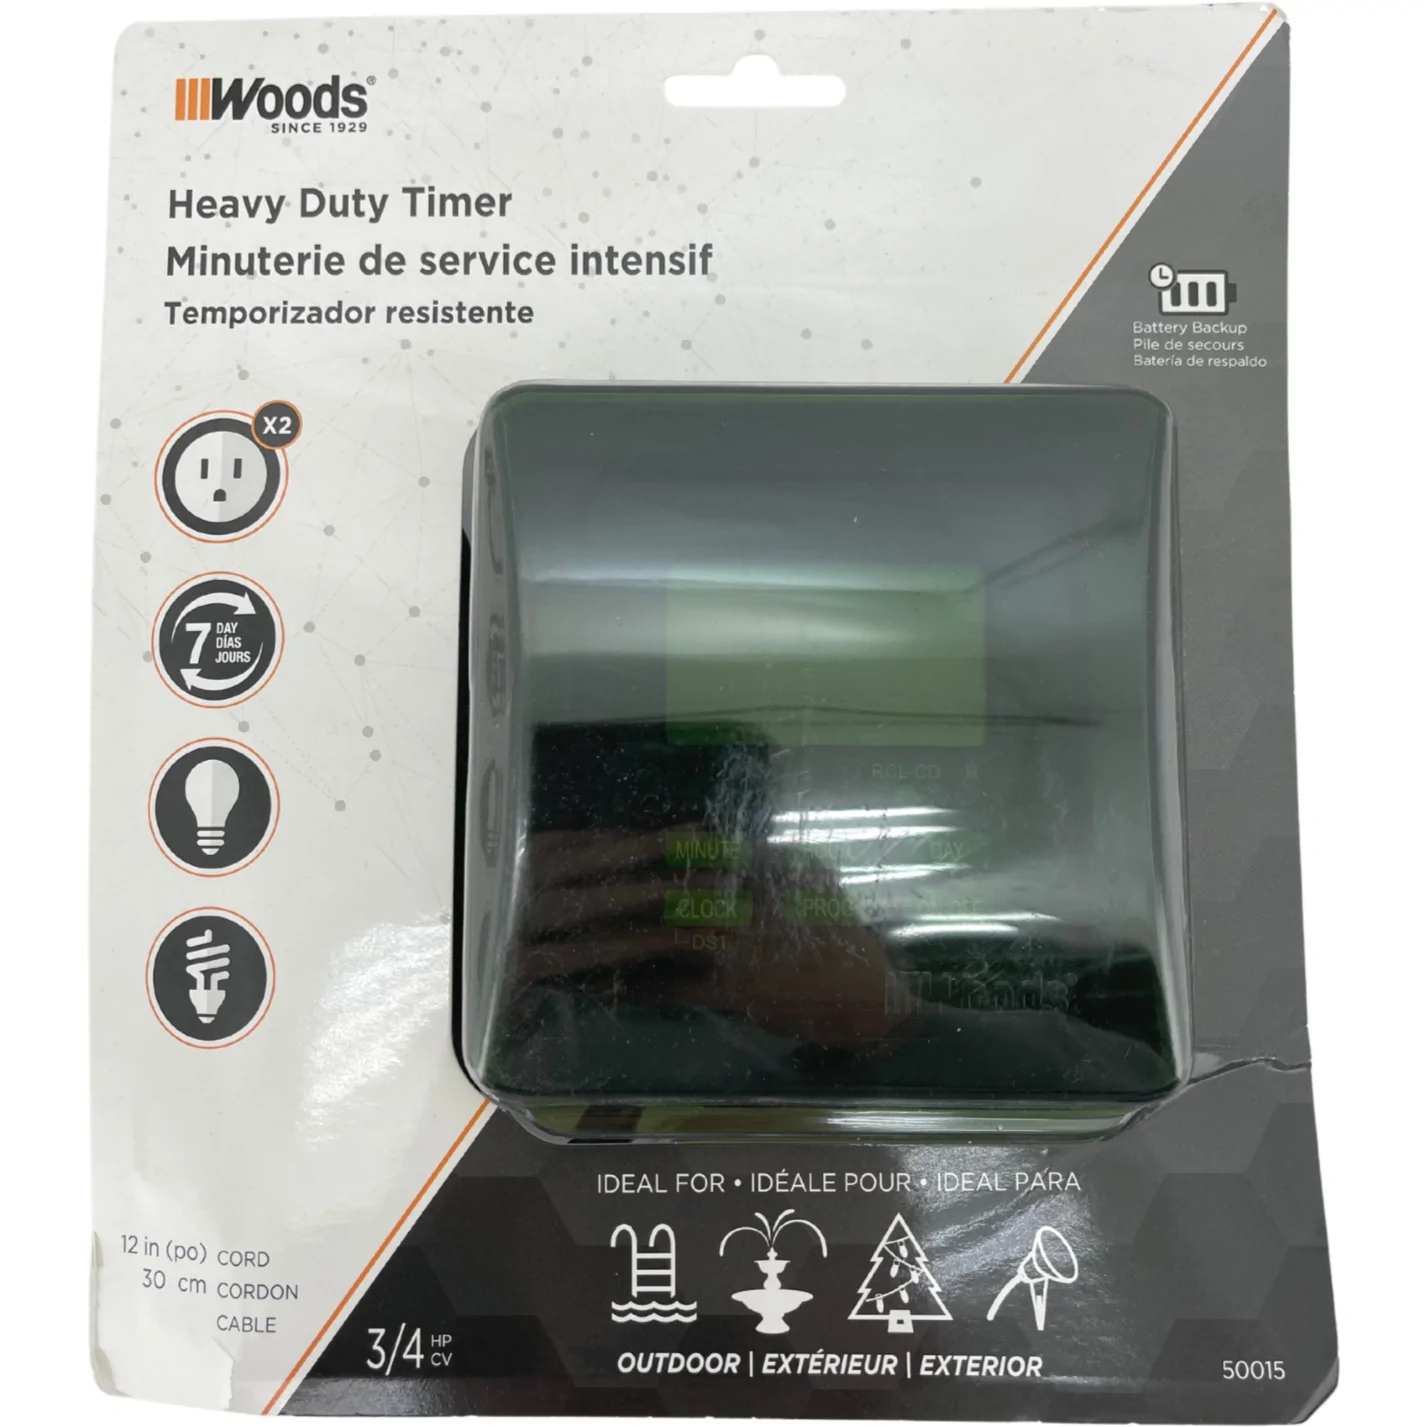 Woods Heavy Duty Timer / Outdoor Use / Programmable Timer **DEALS**